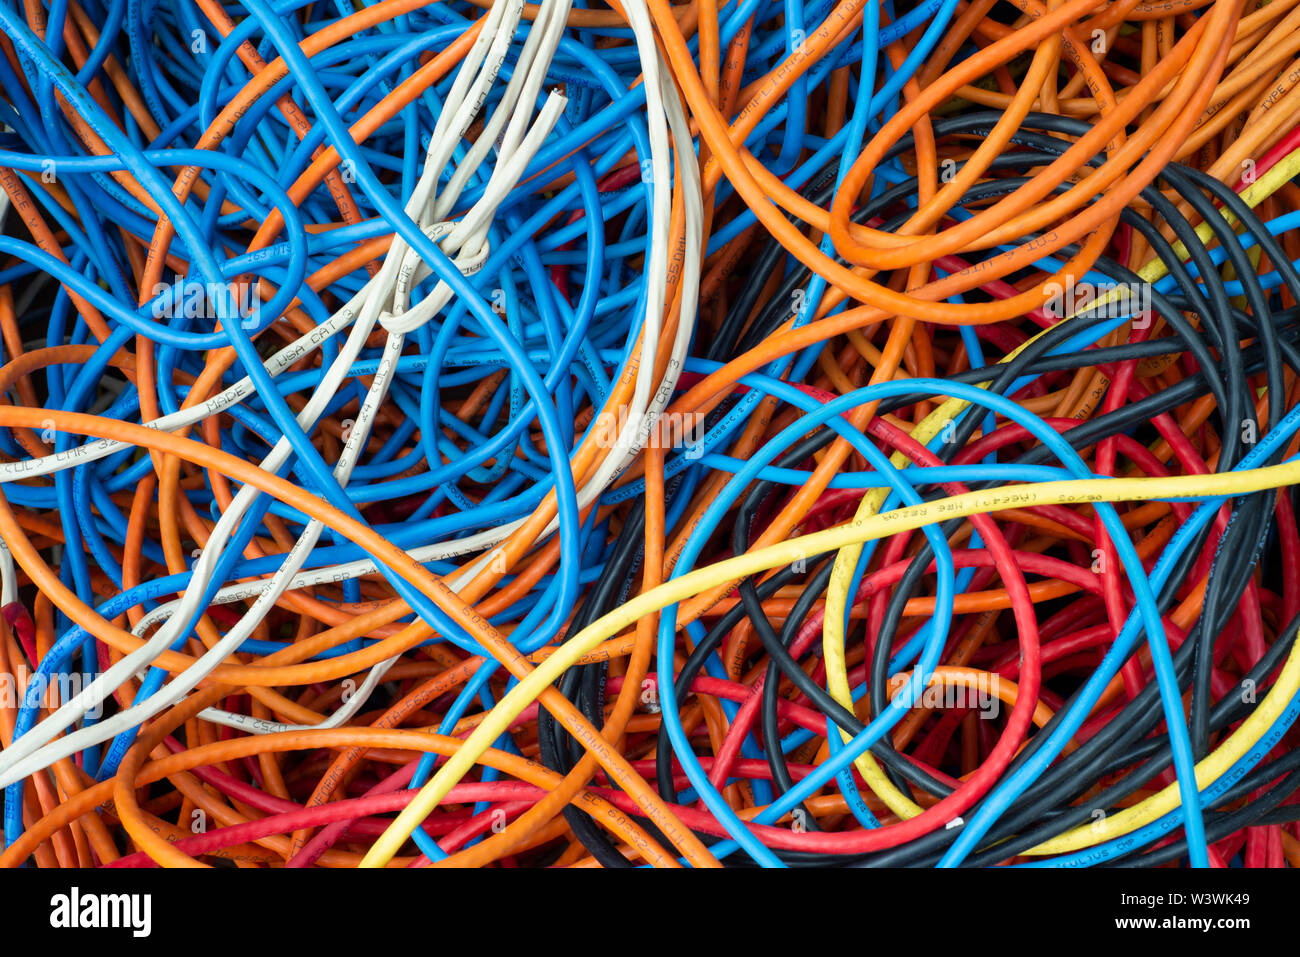 Tangled Cables in Assorted Colors Stock Photo